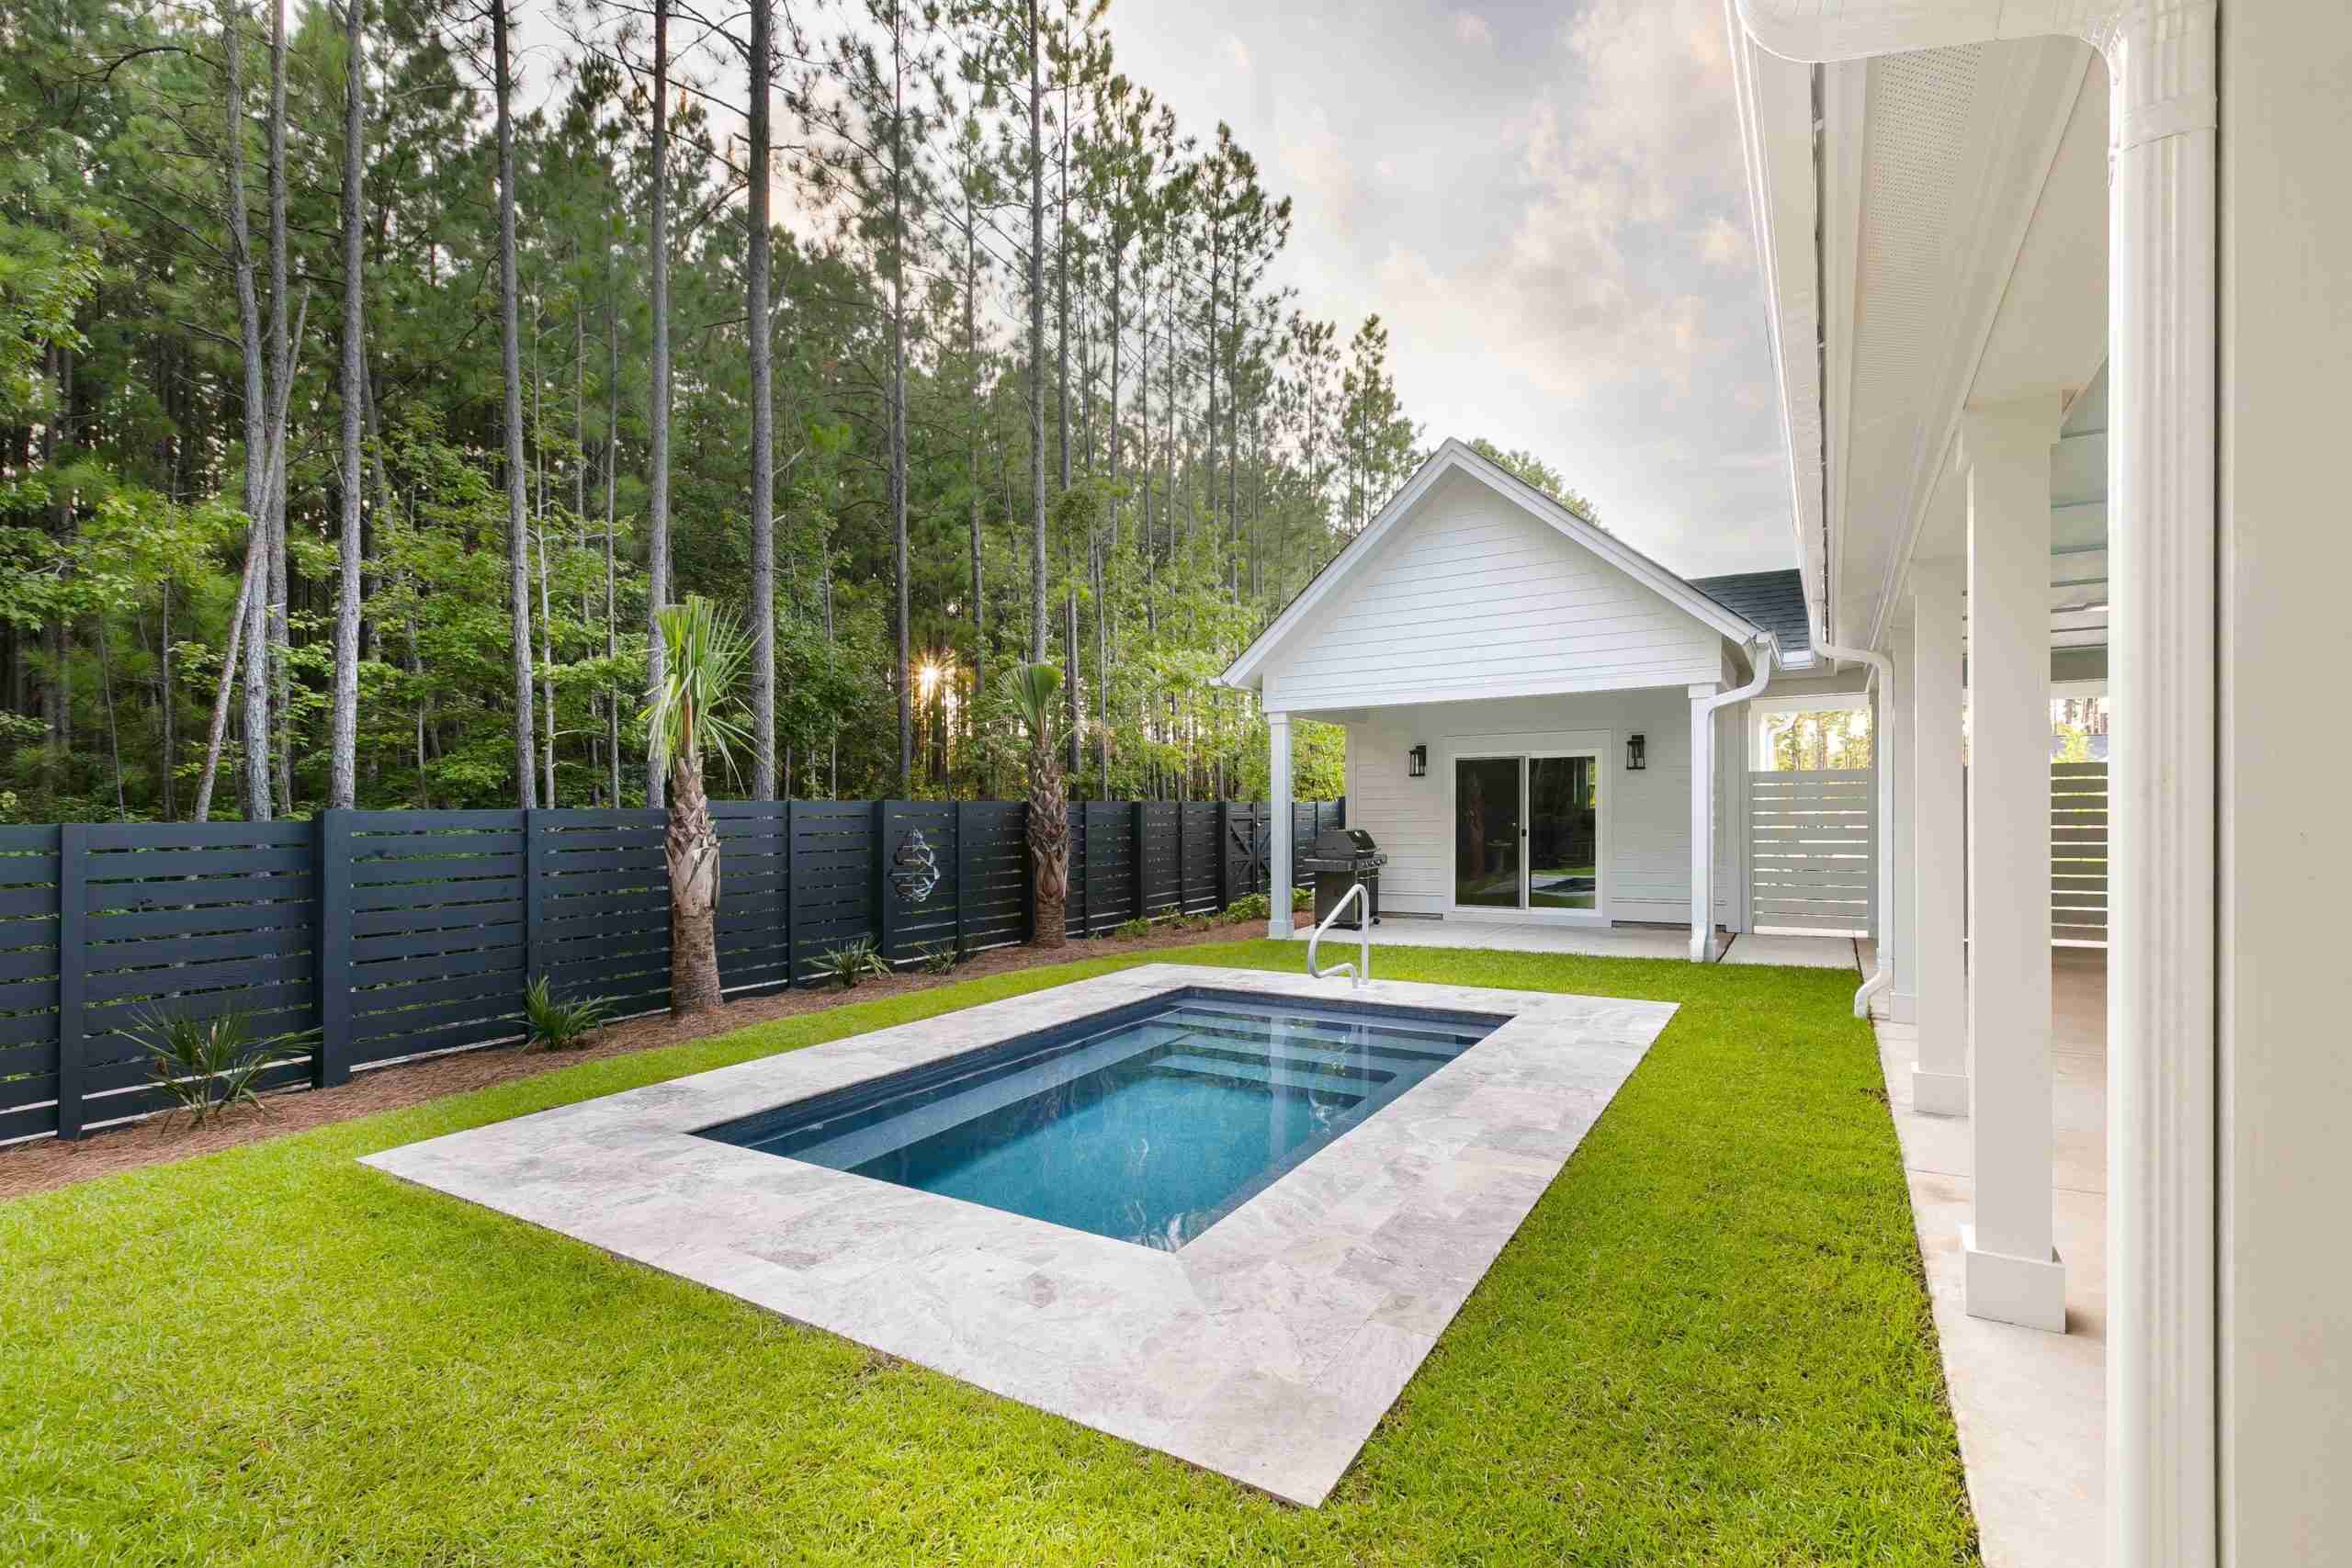 How Much Does It Cost To Put A Pool In Your Backyard